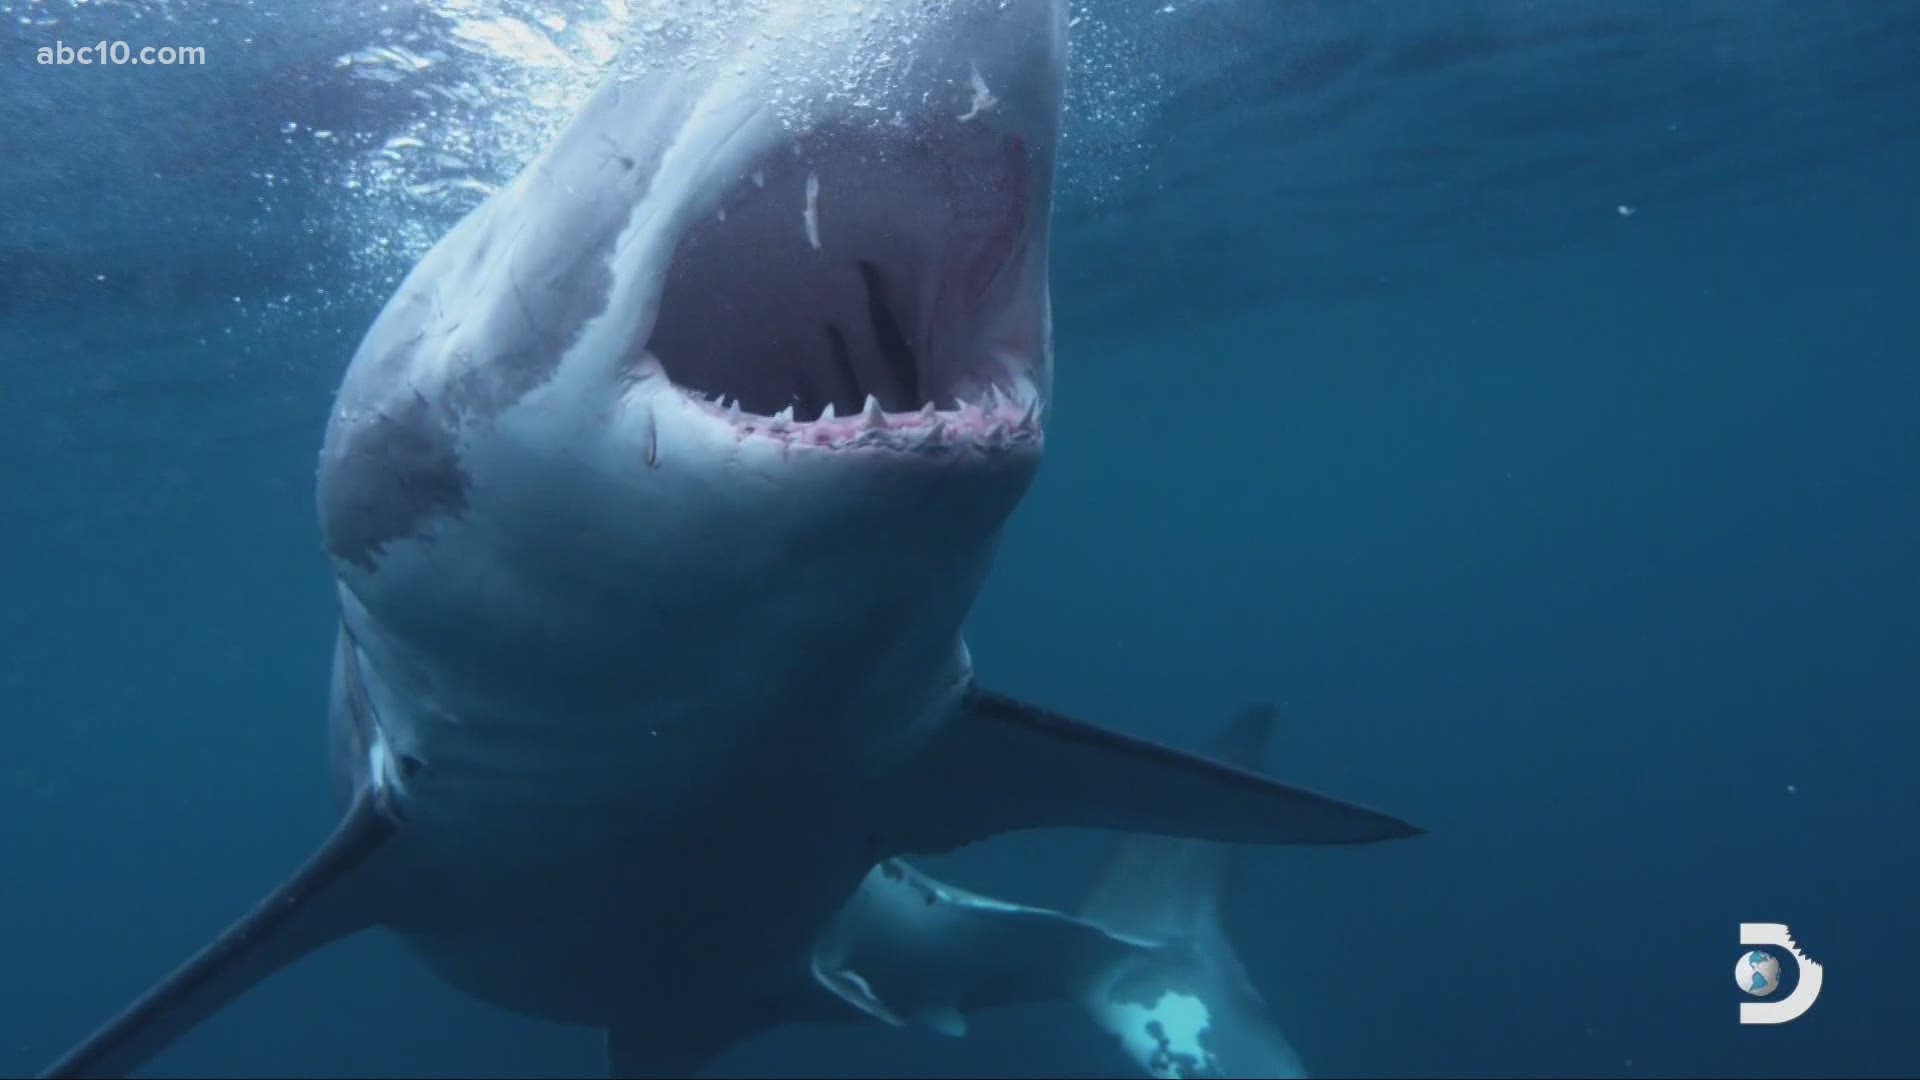 Discovery Channel's "Shark Week" delivers more than 20-hours of jaw dropping shark experiences! Jeff Kurr has been at it for 30 years and is the creator of the “Air